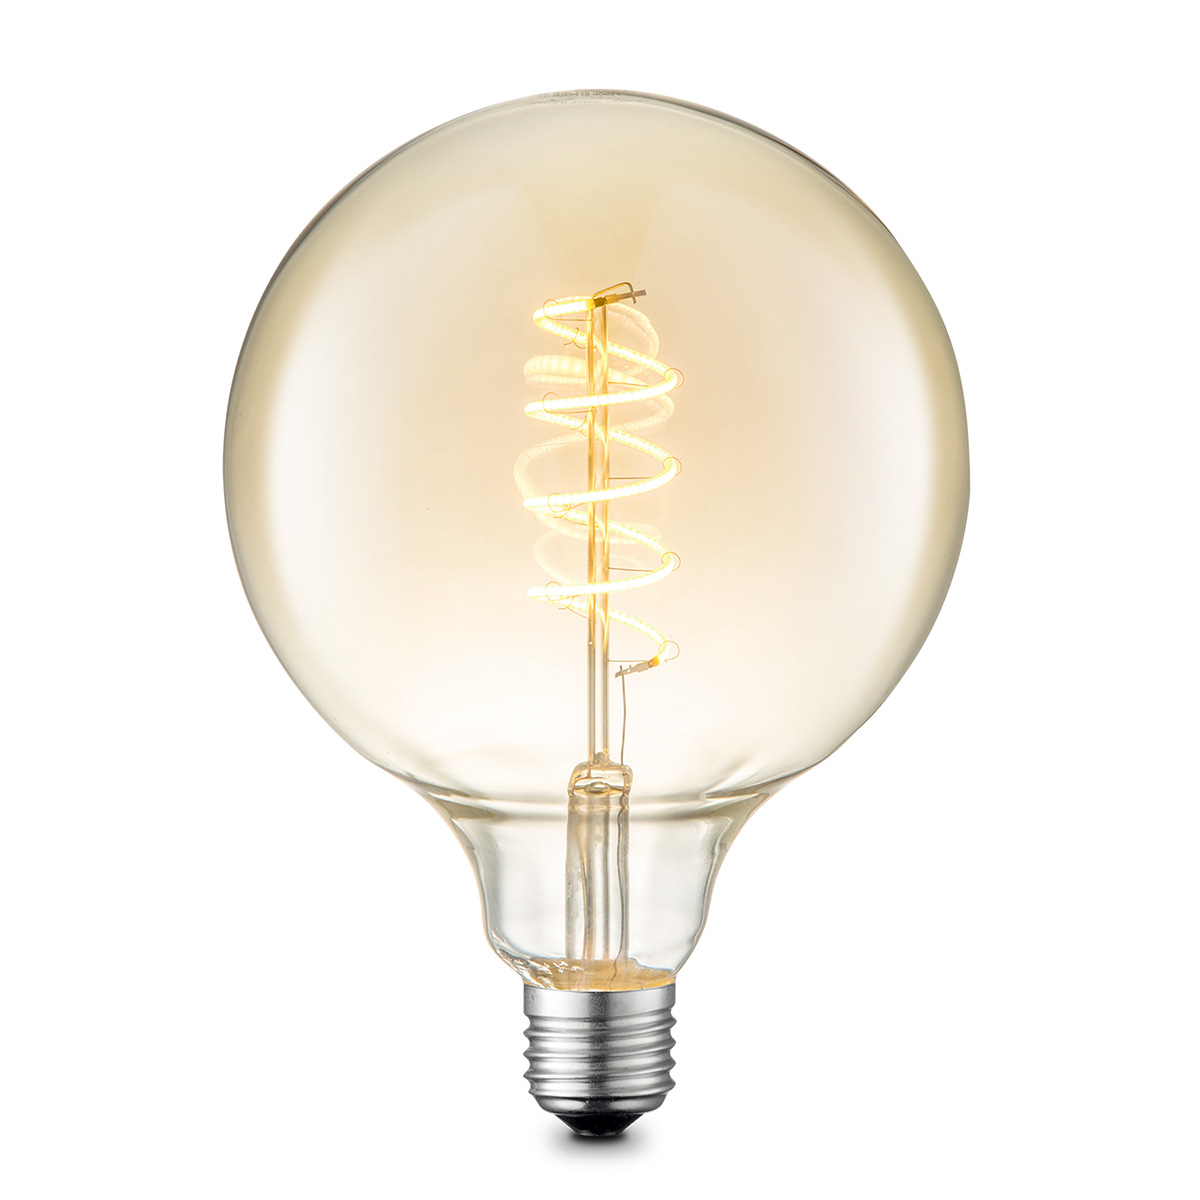 Tangla lighting - TLB-8009-04AM - LED Light Bulb Double Spiral filament - G125 4W amber - dimmable - E27